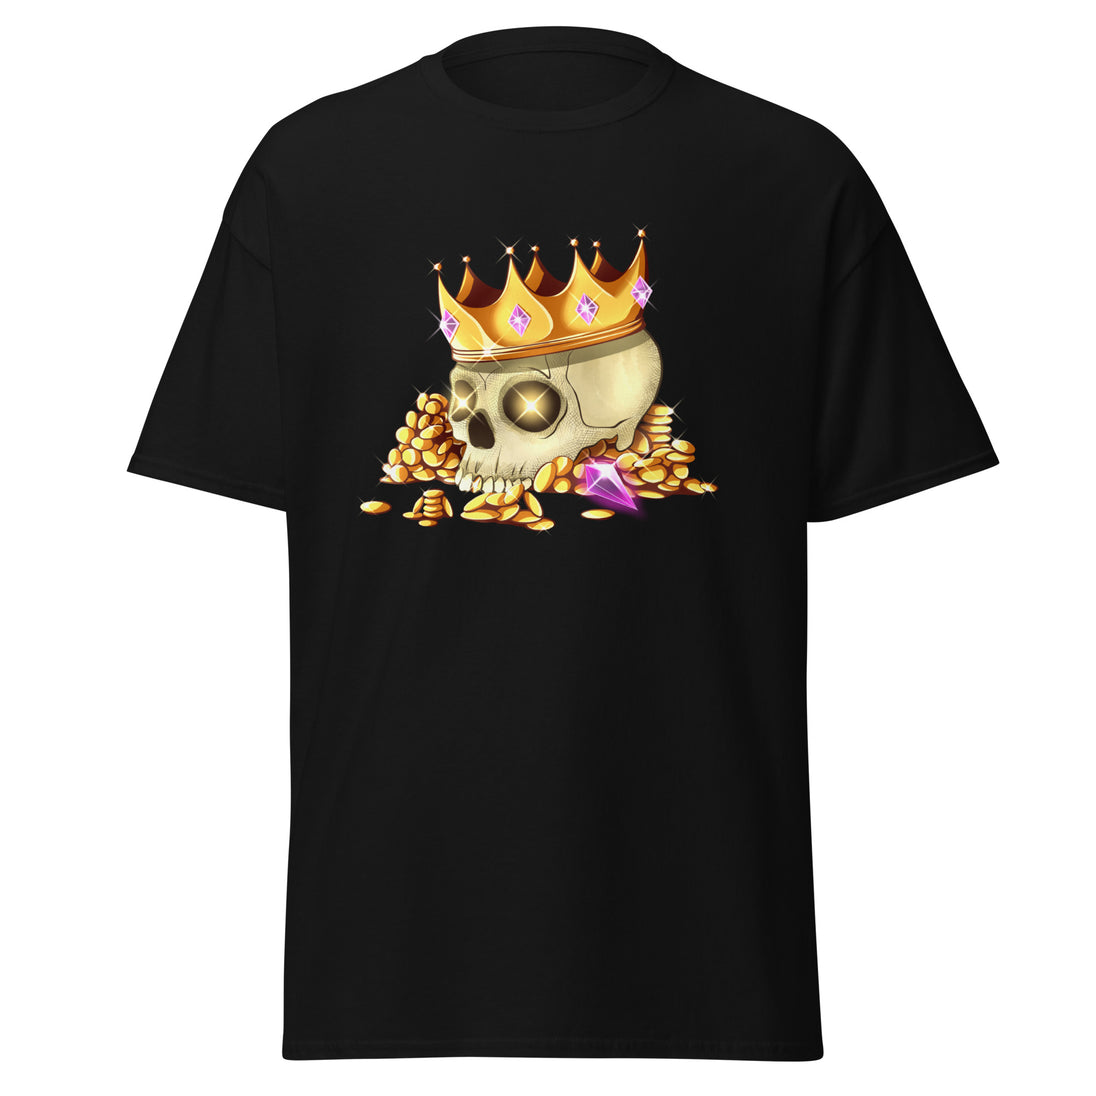 Skull Pirate Treasure T-Shirt - Soft, Comfortable, and Unique Design for Gamers and Streamers